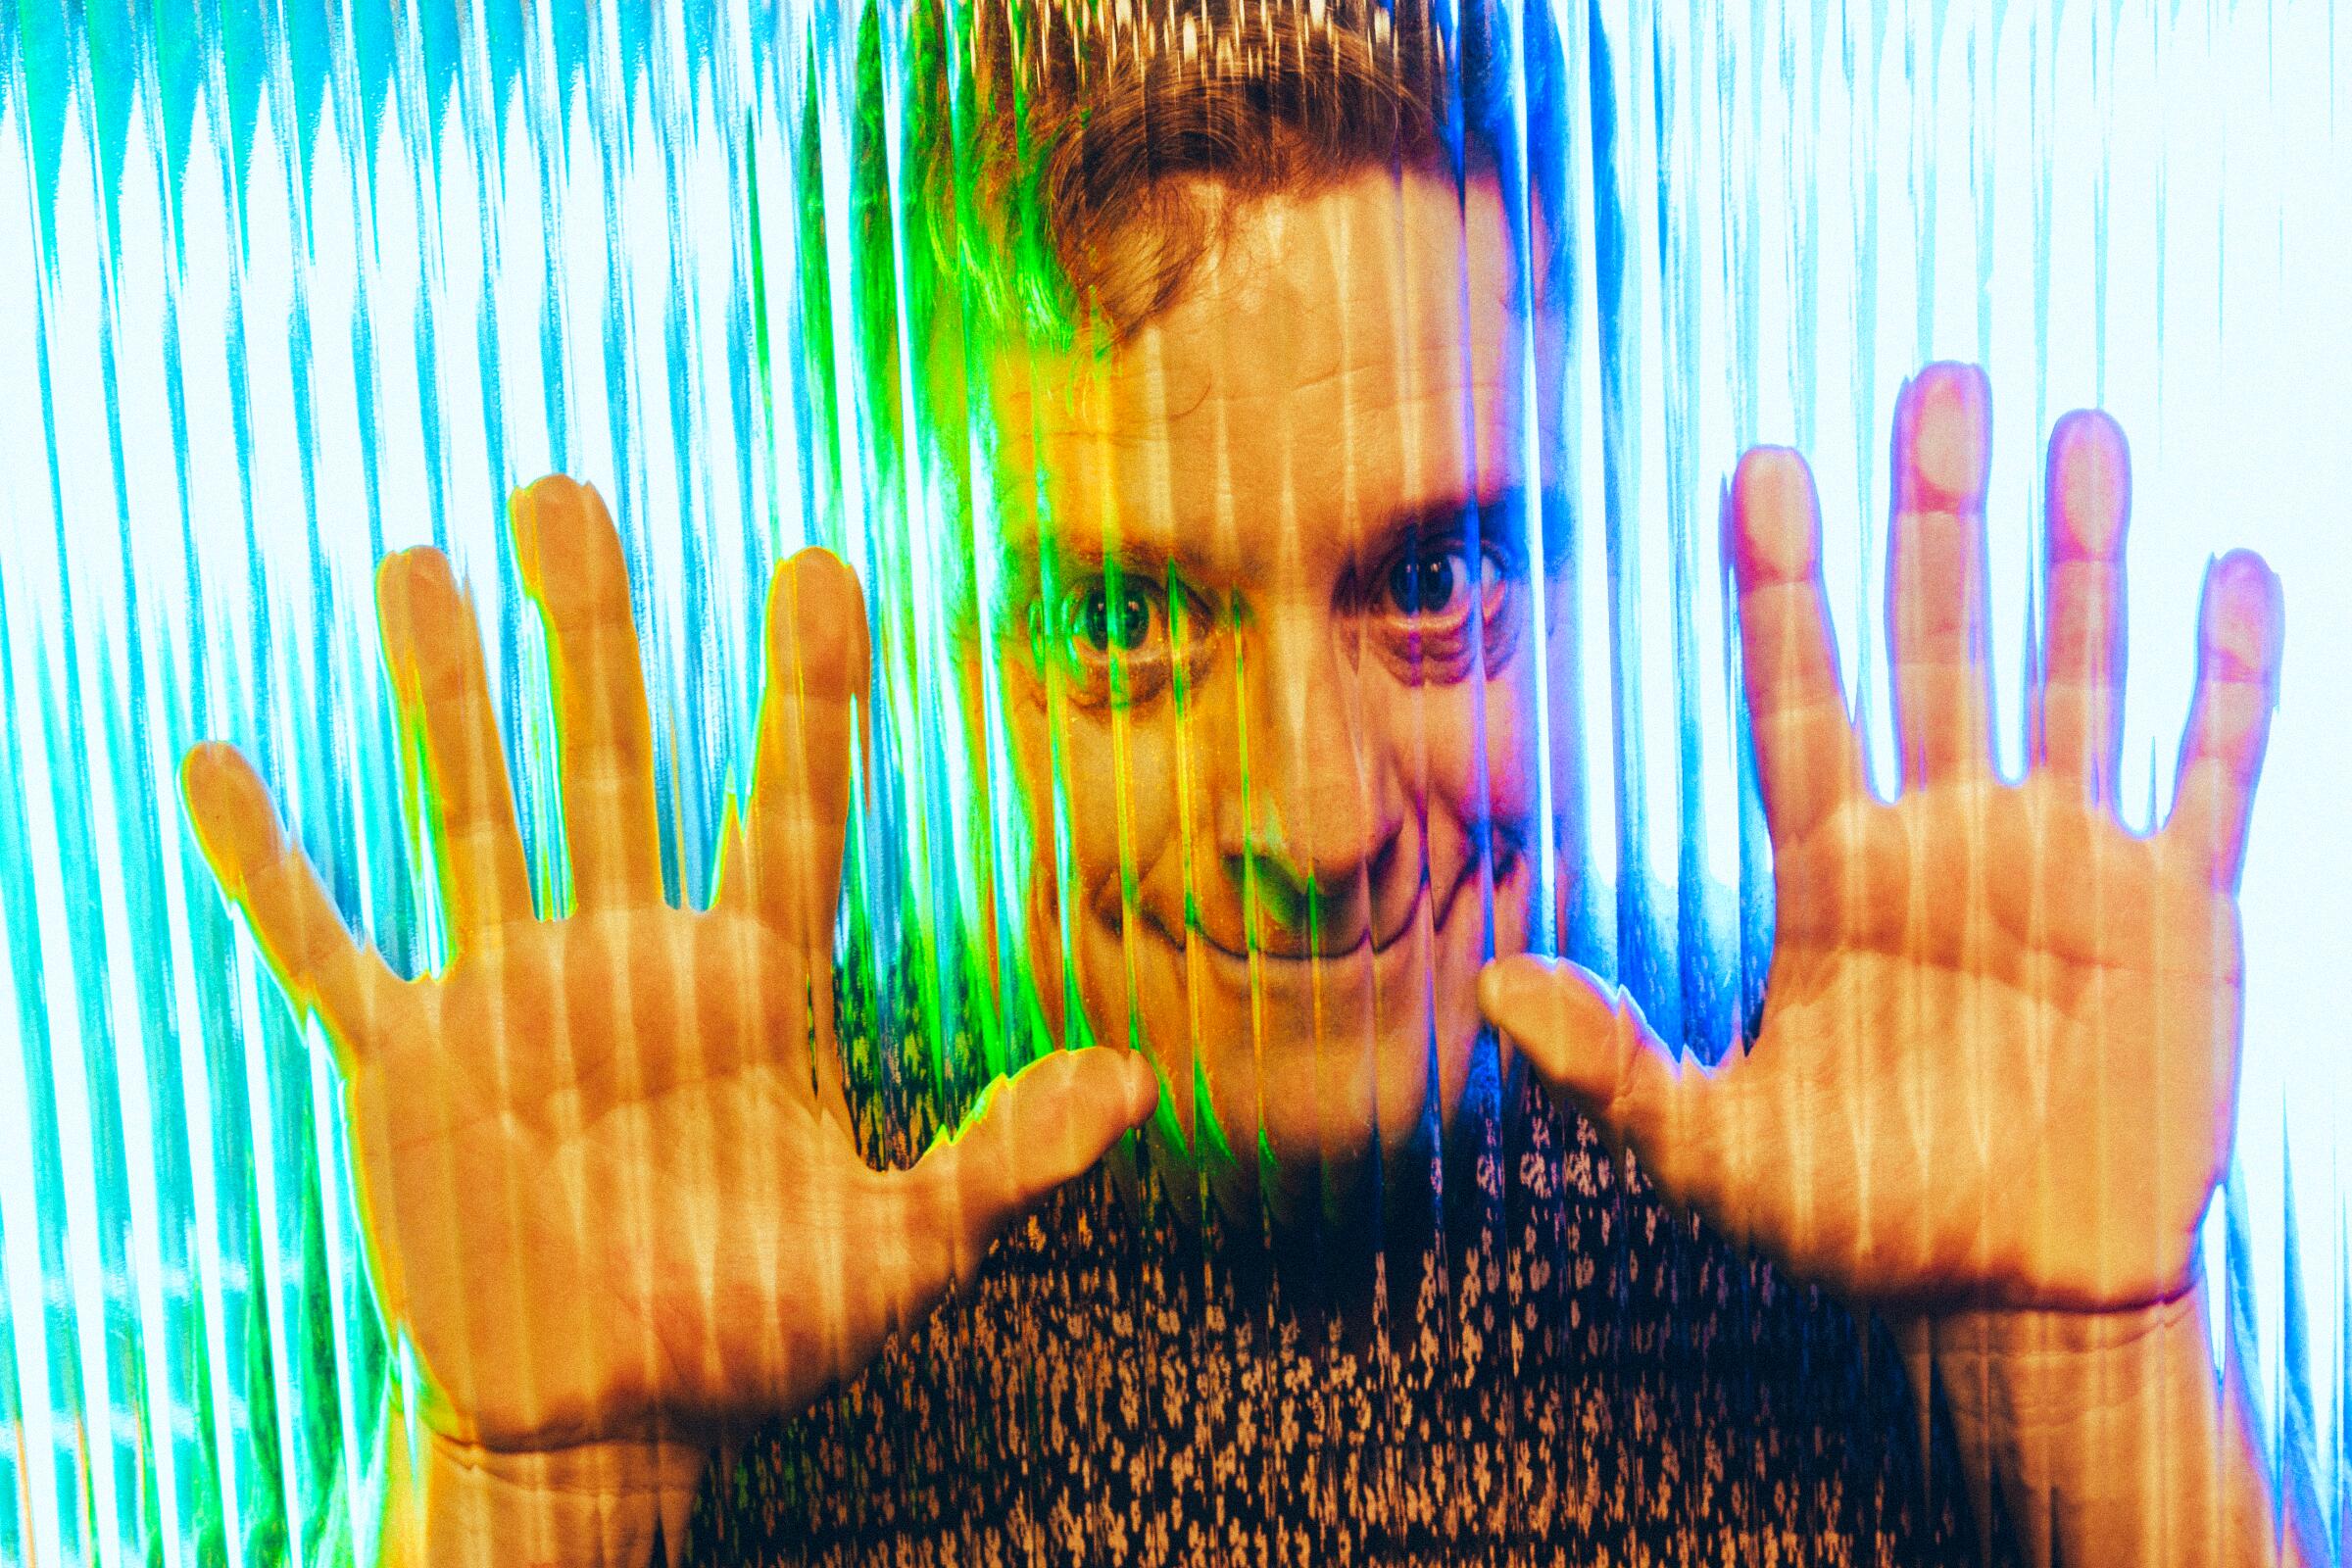 Alan Tudyk presses up against rippled glass for a portrait.